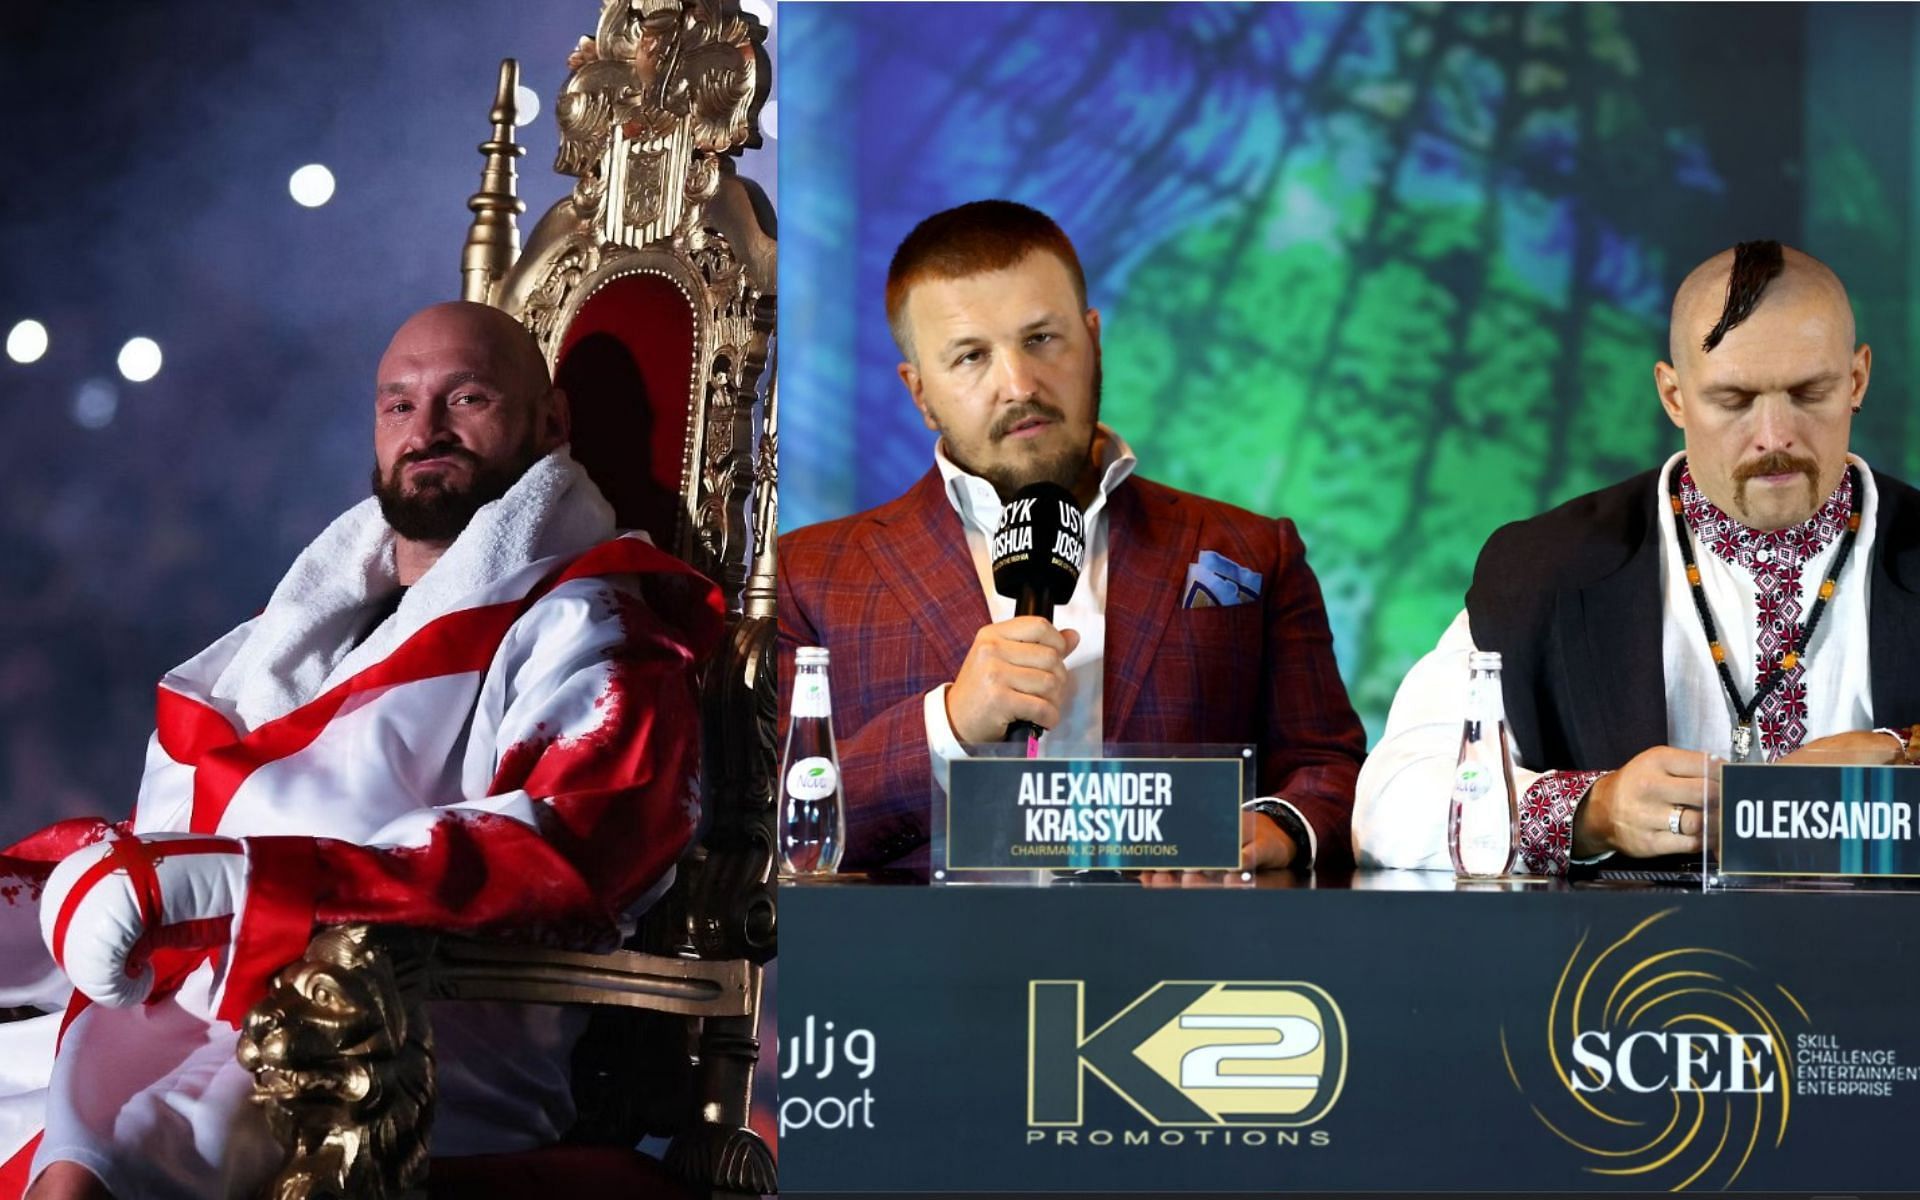 Tyson Fury (Left) and Alex Krassyuk with Oleksandr Usyk (Right) (Image Credits; Getty Images)